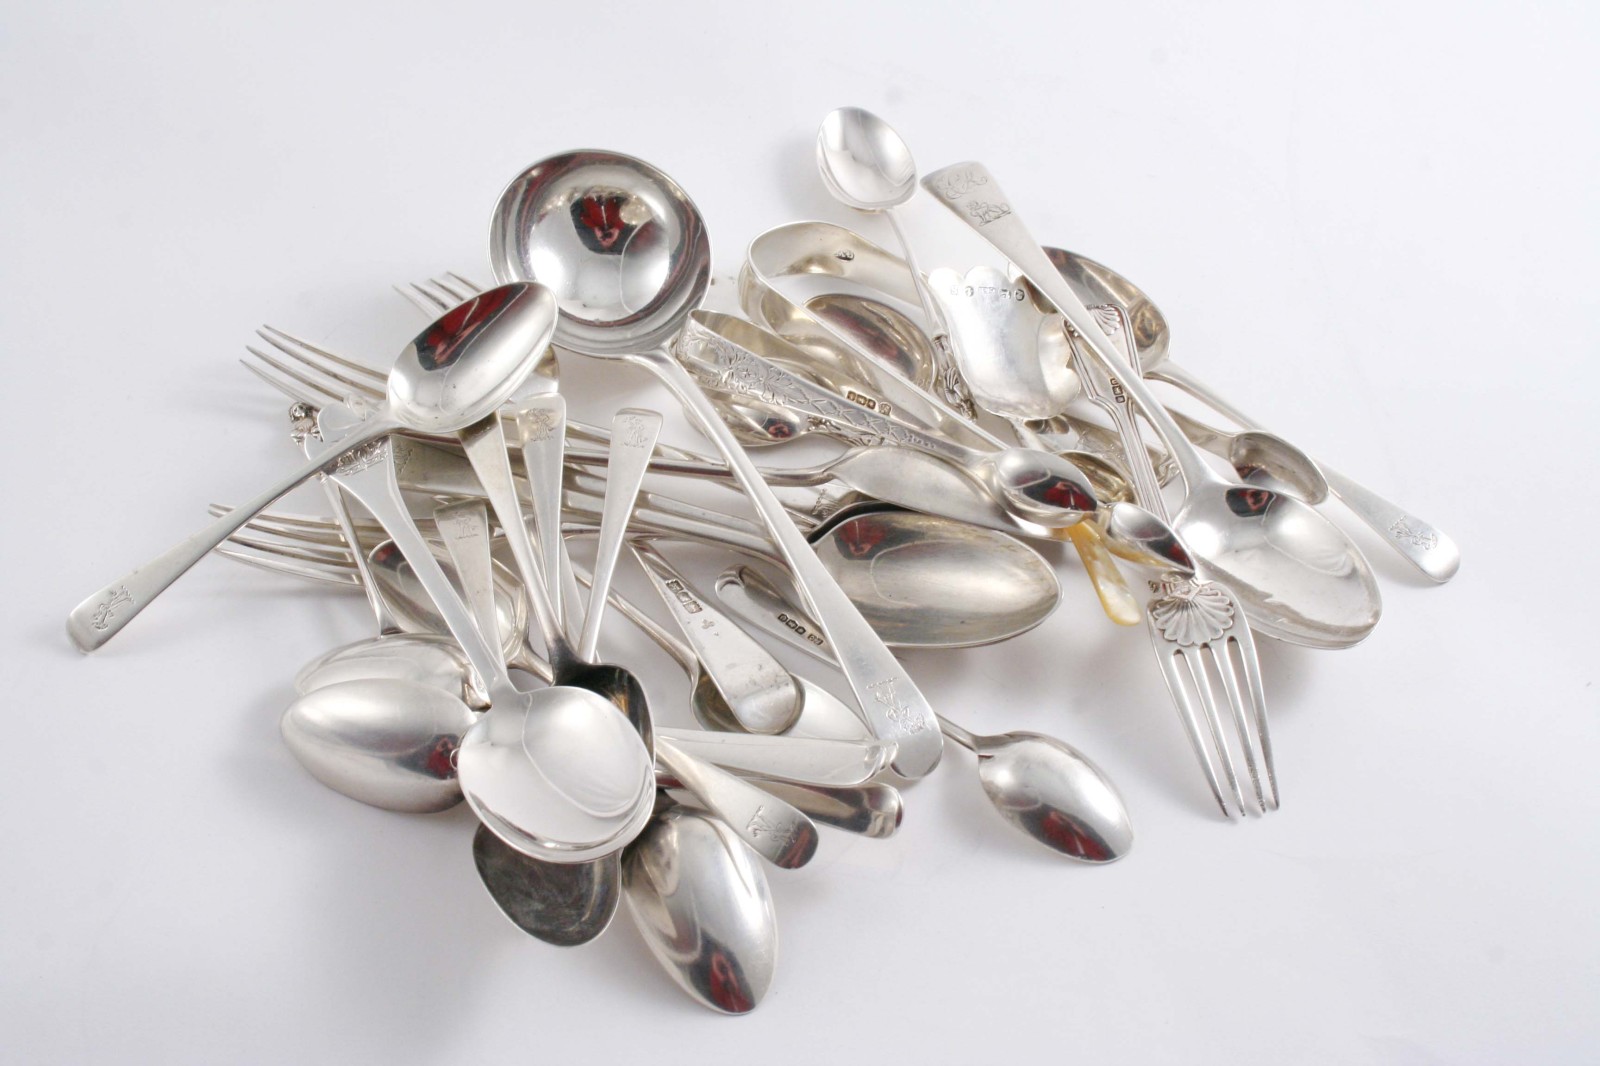 MIXED FLATWARE: An Old English pattern sauce ladle, twelve tea spoons, four dessert forks and